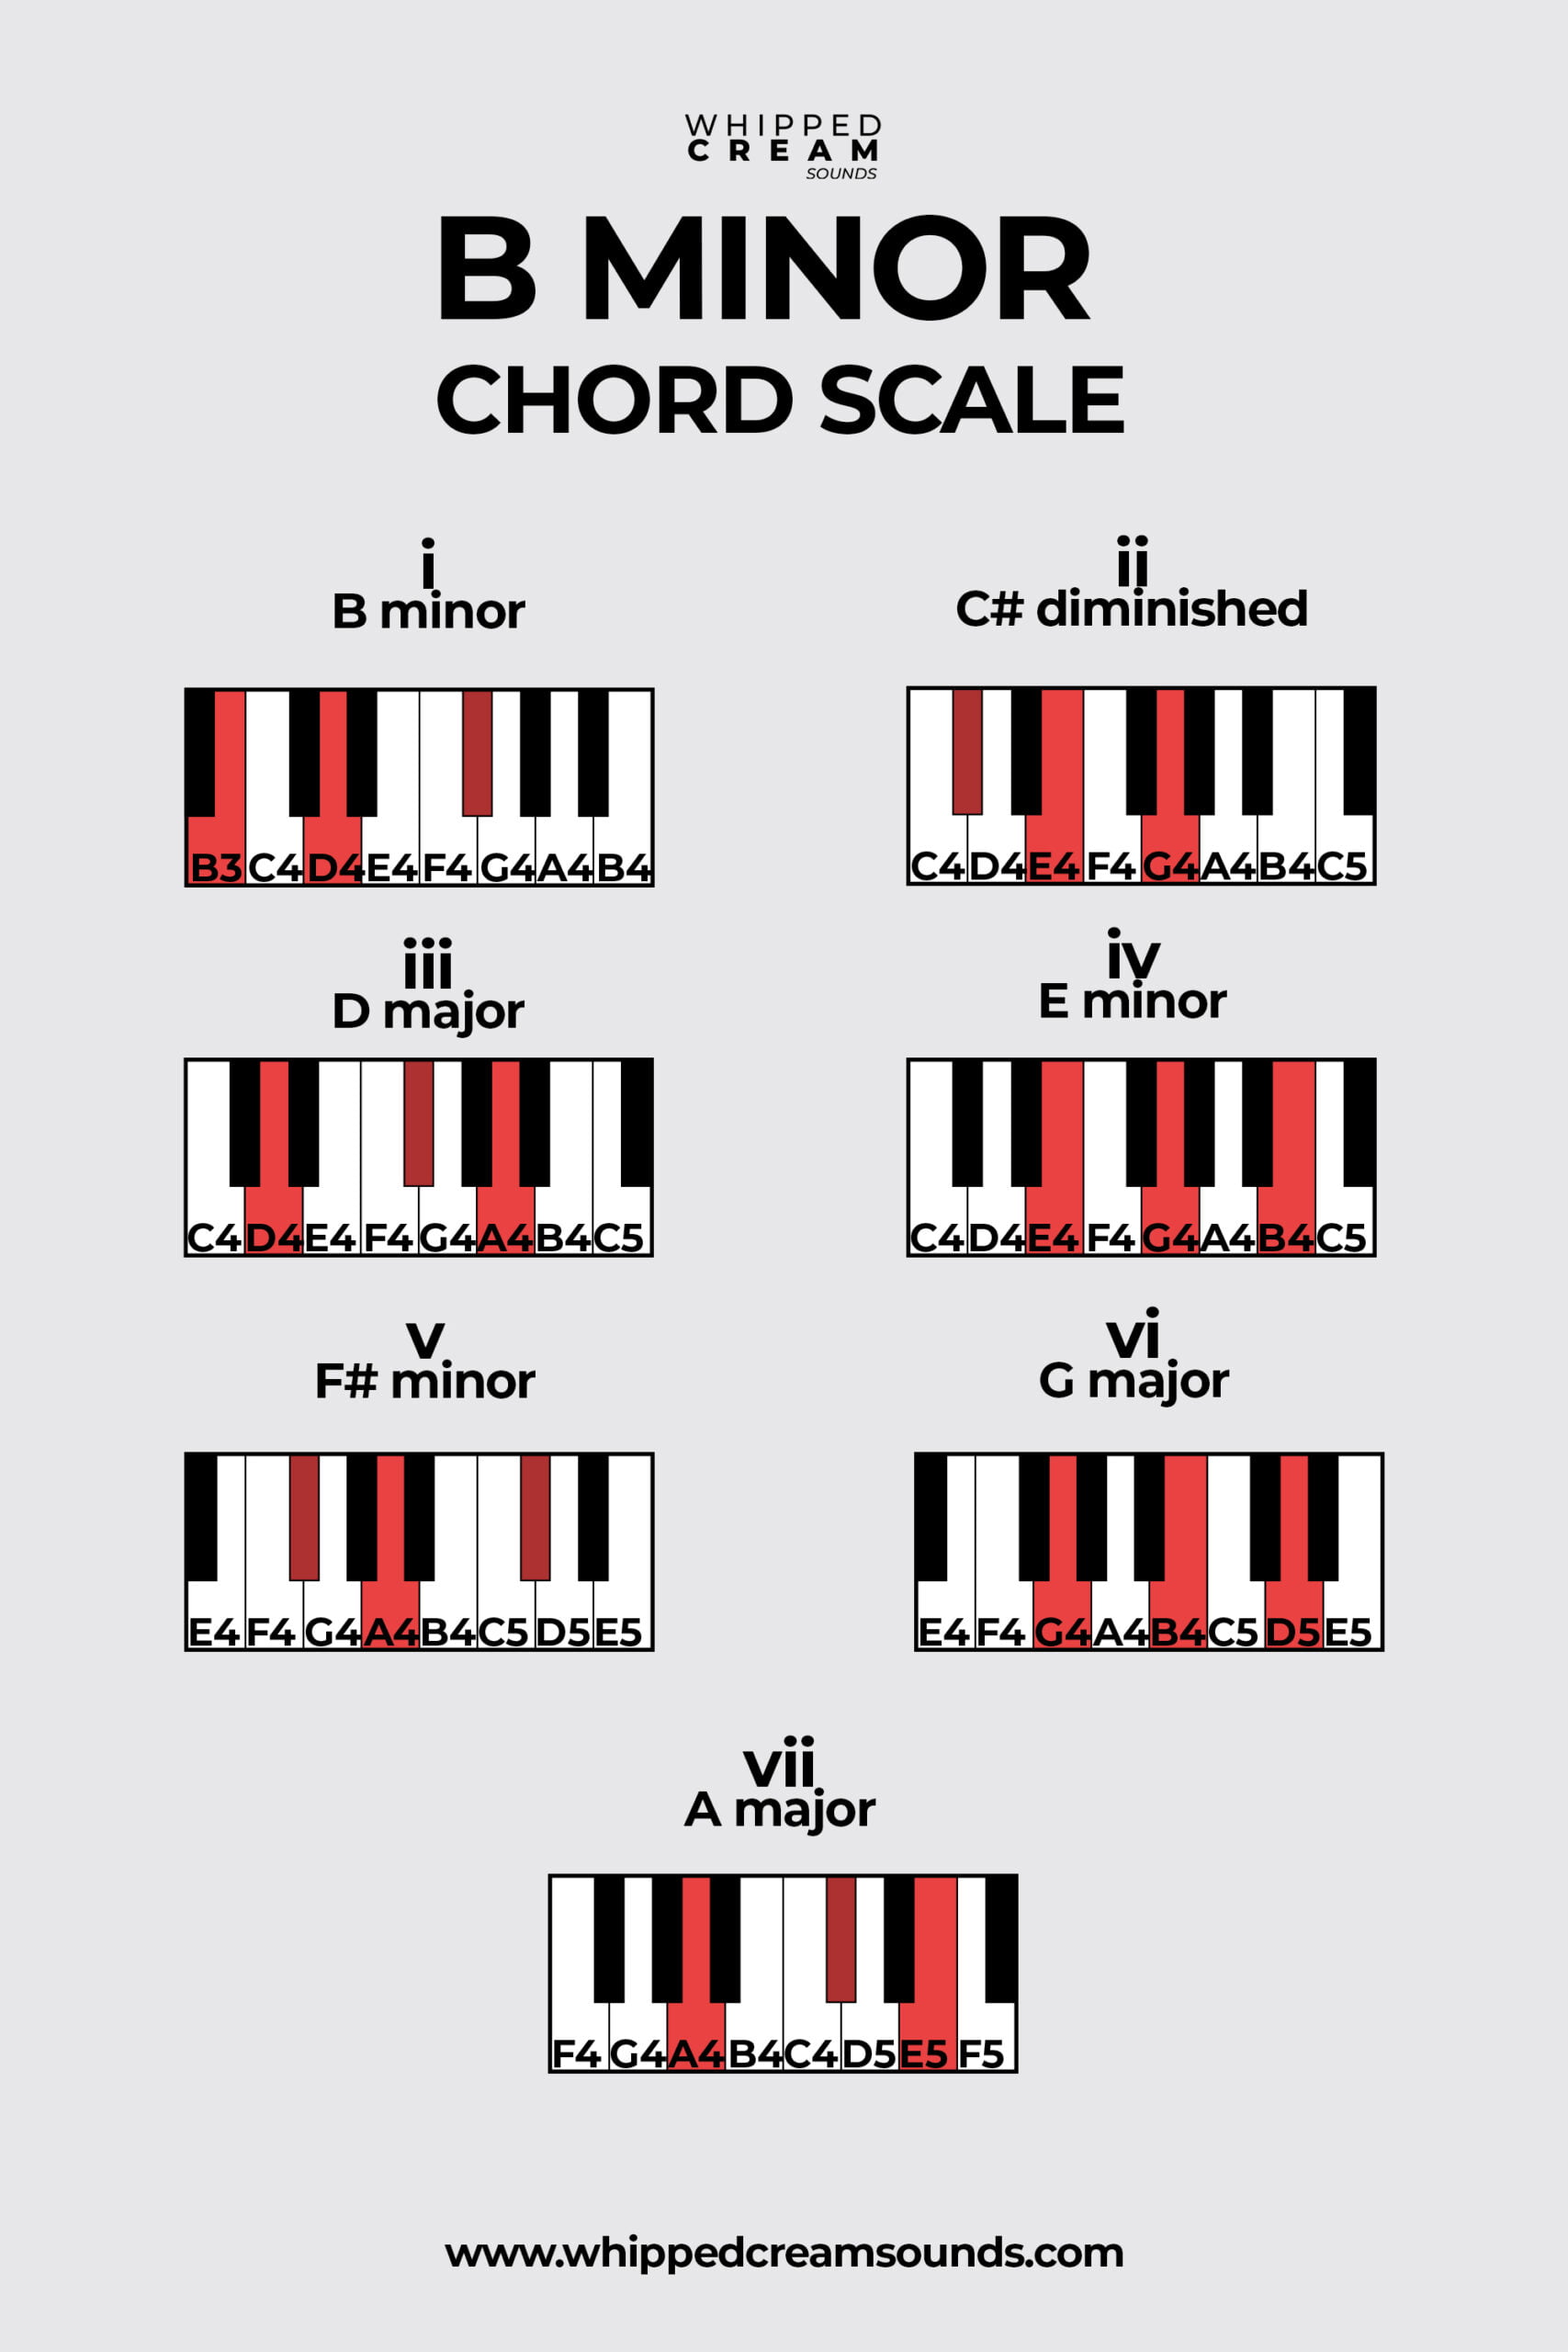 B Minor Chord Scale, Chords in The Key of B Minor